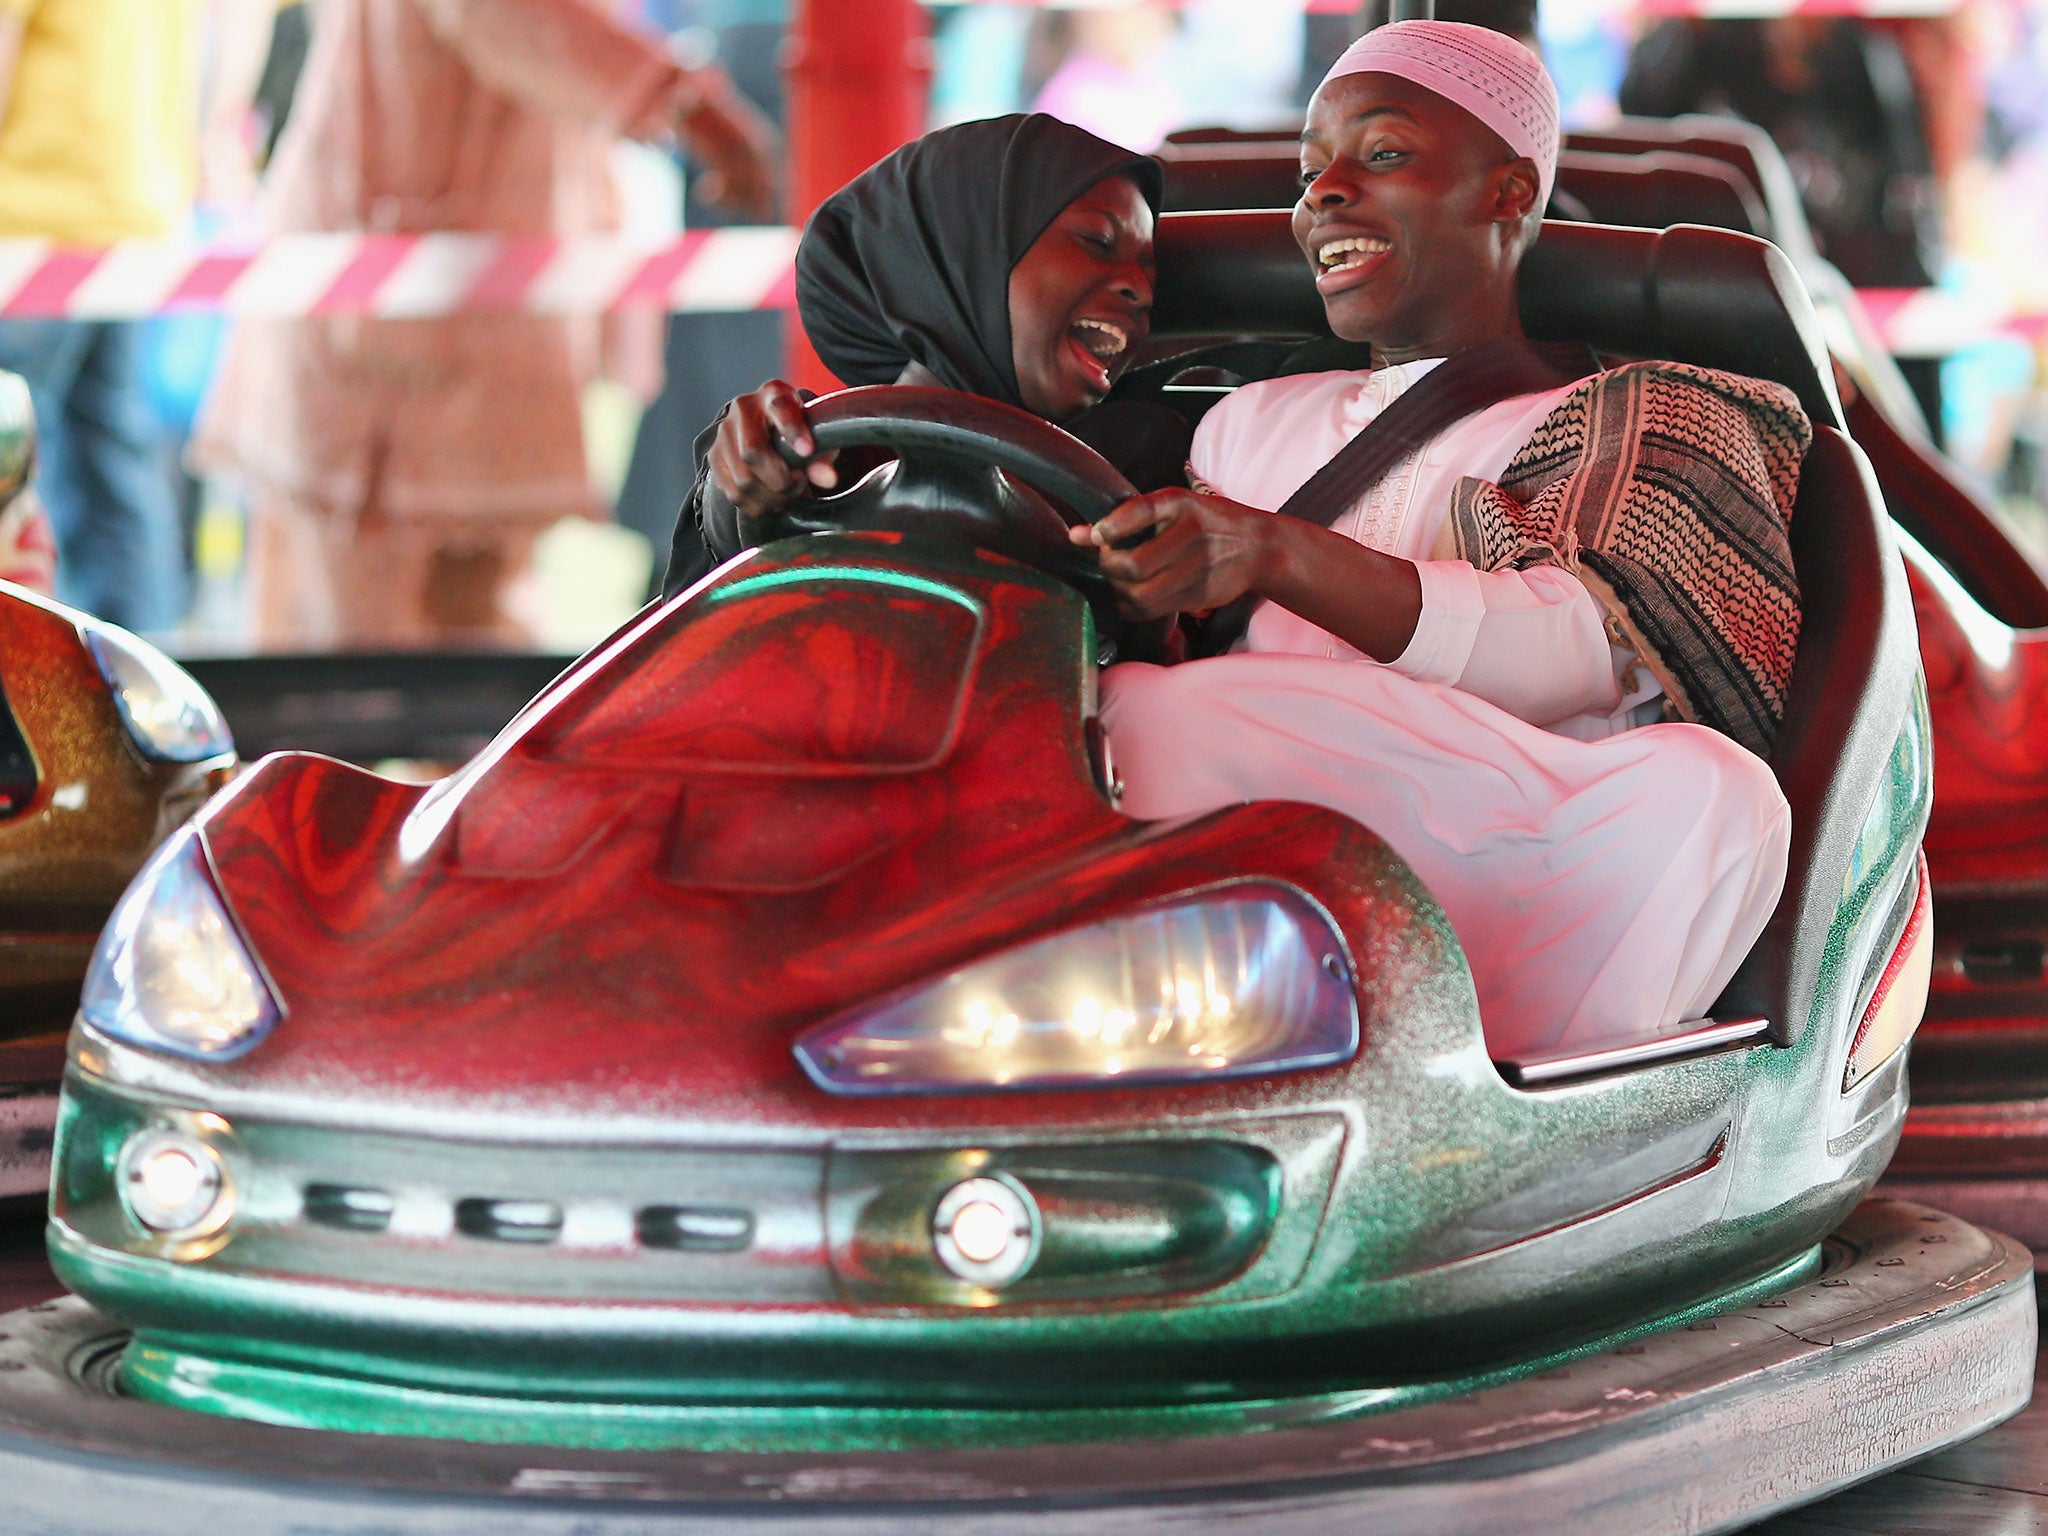 People ride on Bumper cars during an Eid celebration in Burgess Park (Image: Getty)